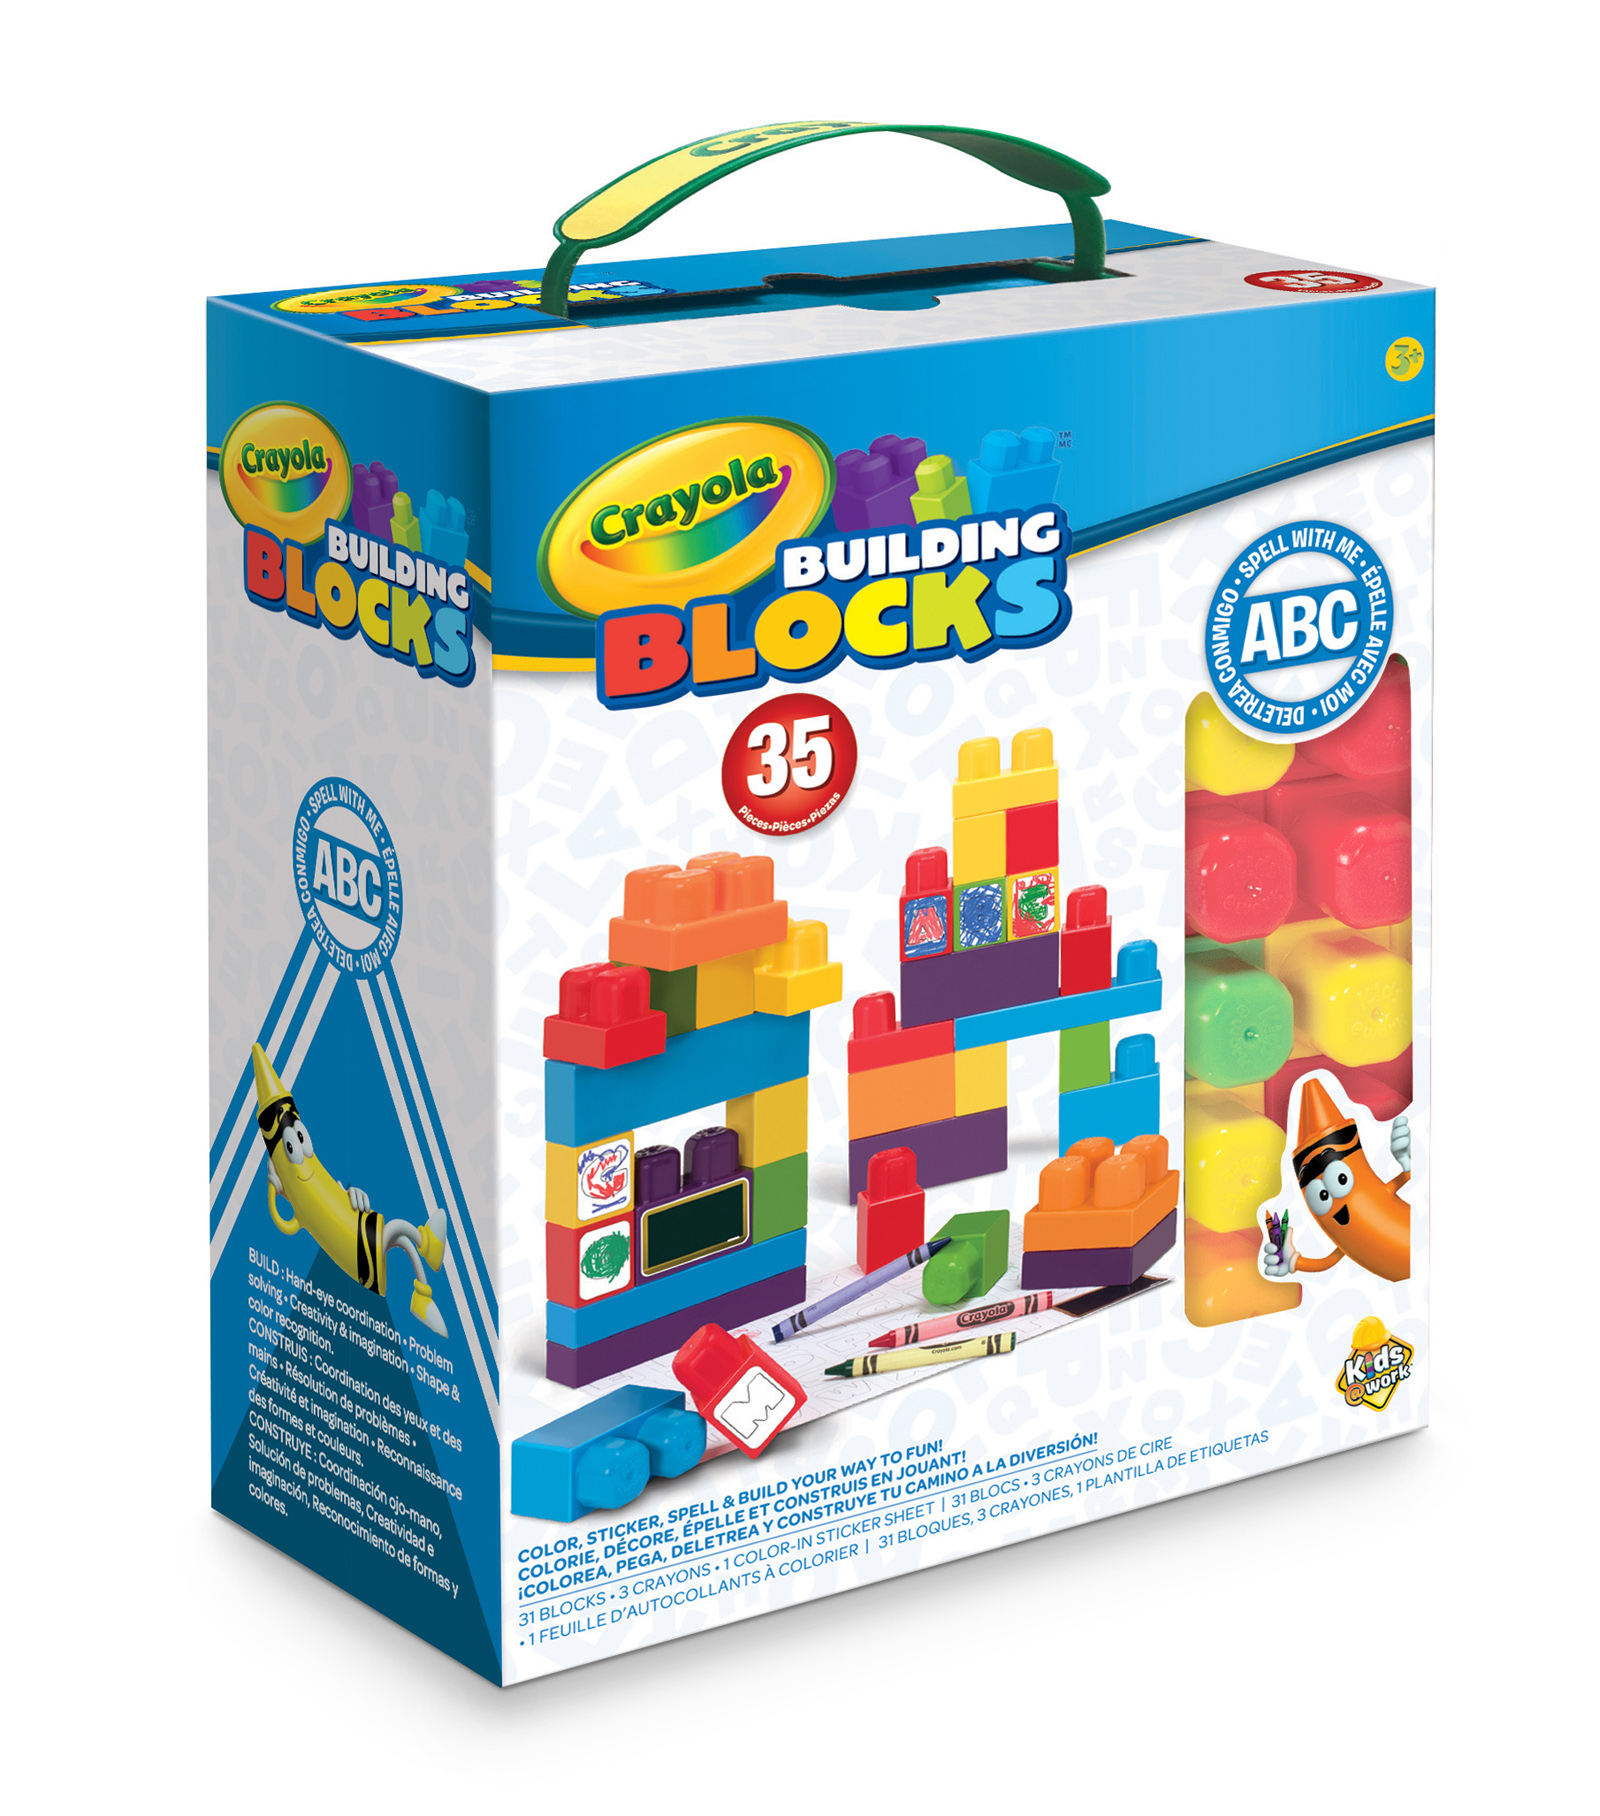 Crayola 35 Piece Spell with Me Building Block Playset by Kids@Work